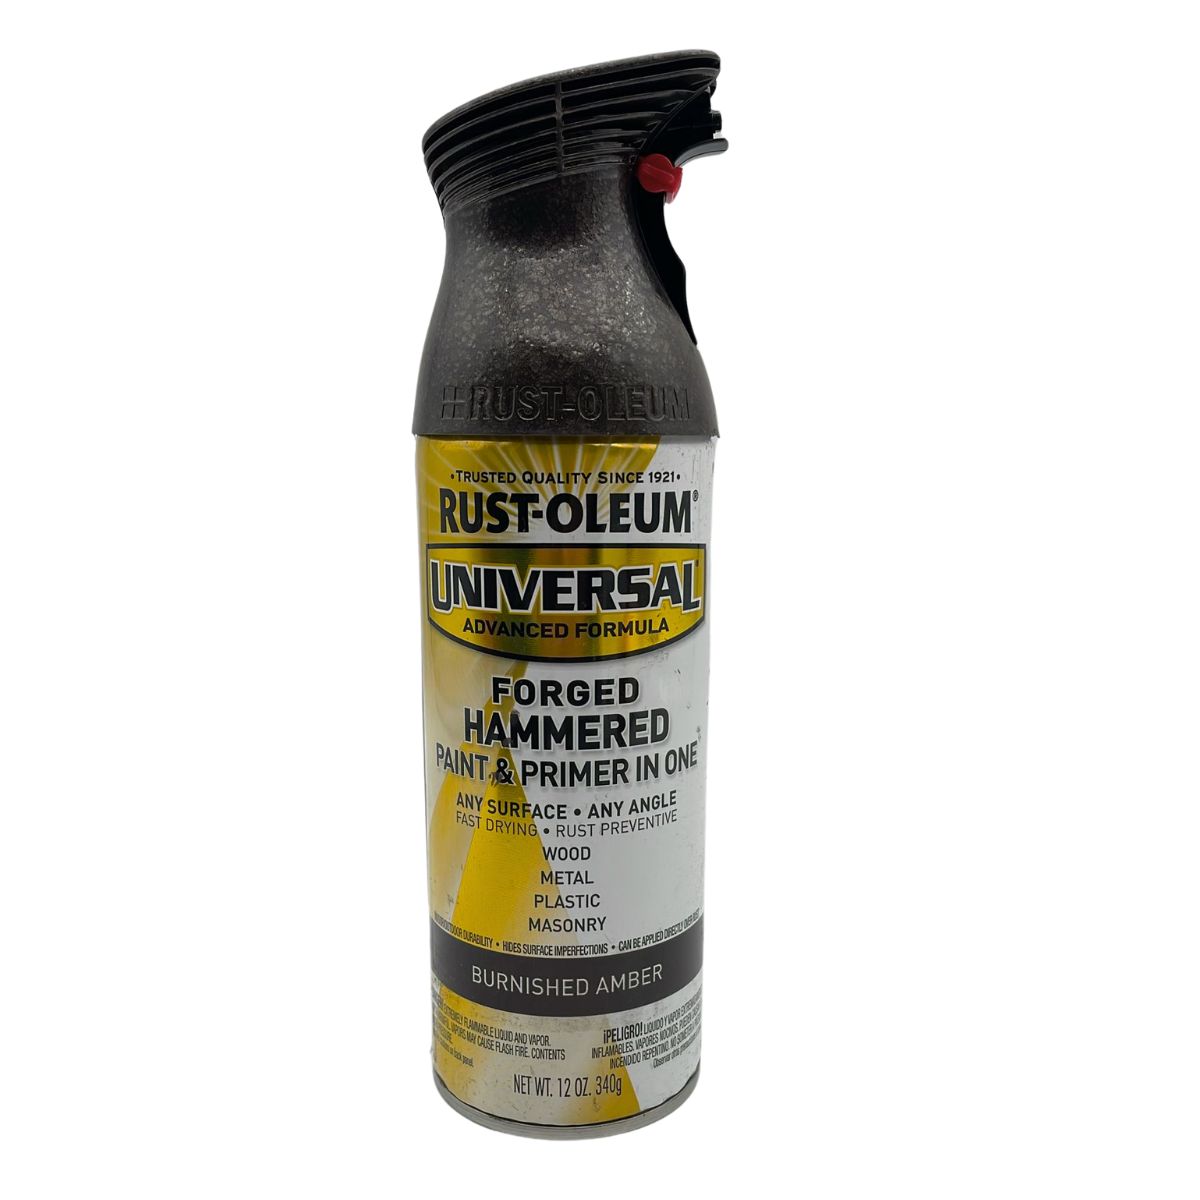 Rust-Oleum Universal Forged Hammered Burnished Amber - 271480 Spraypaint 340g